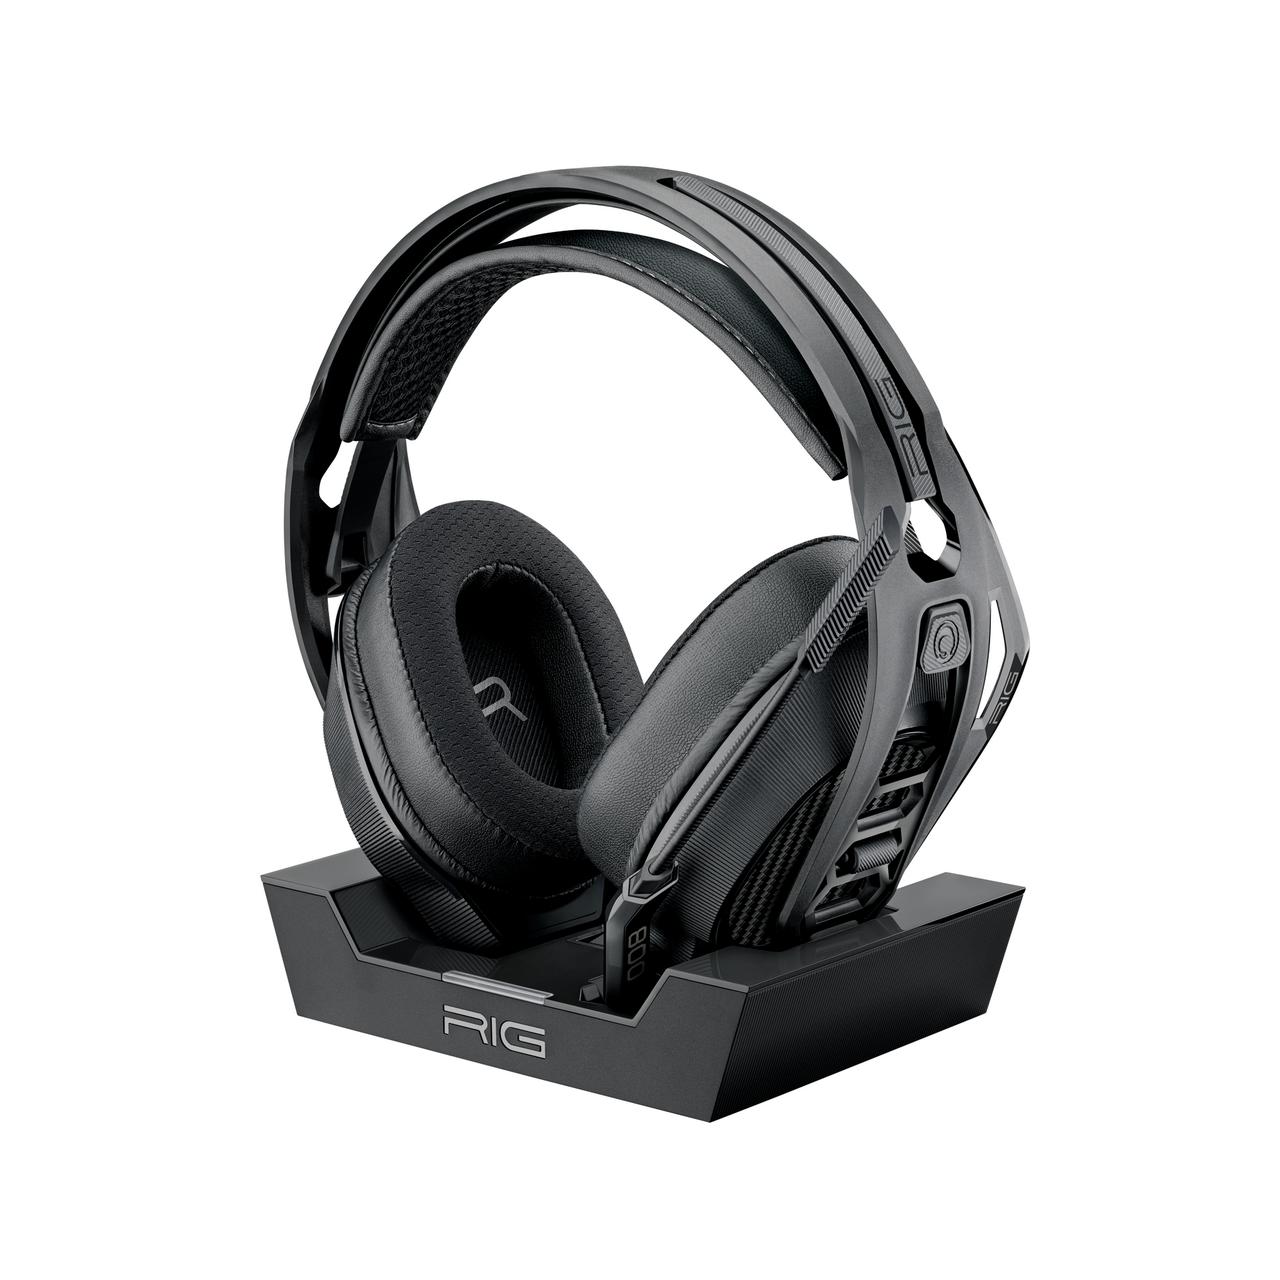 RIG 800 PRO HS Wireless PlayStation Gaming Headset for PS5, PS4 & PC - Black - image 1 of 14